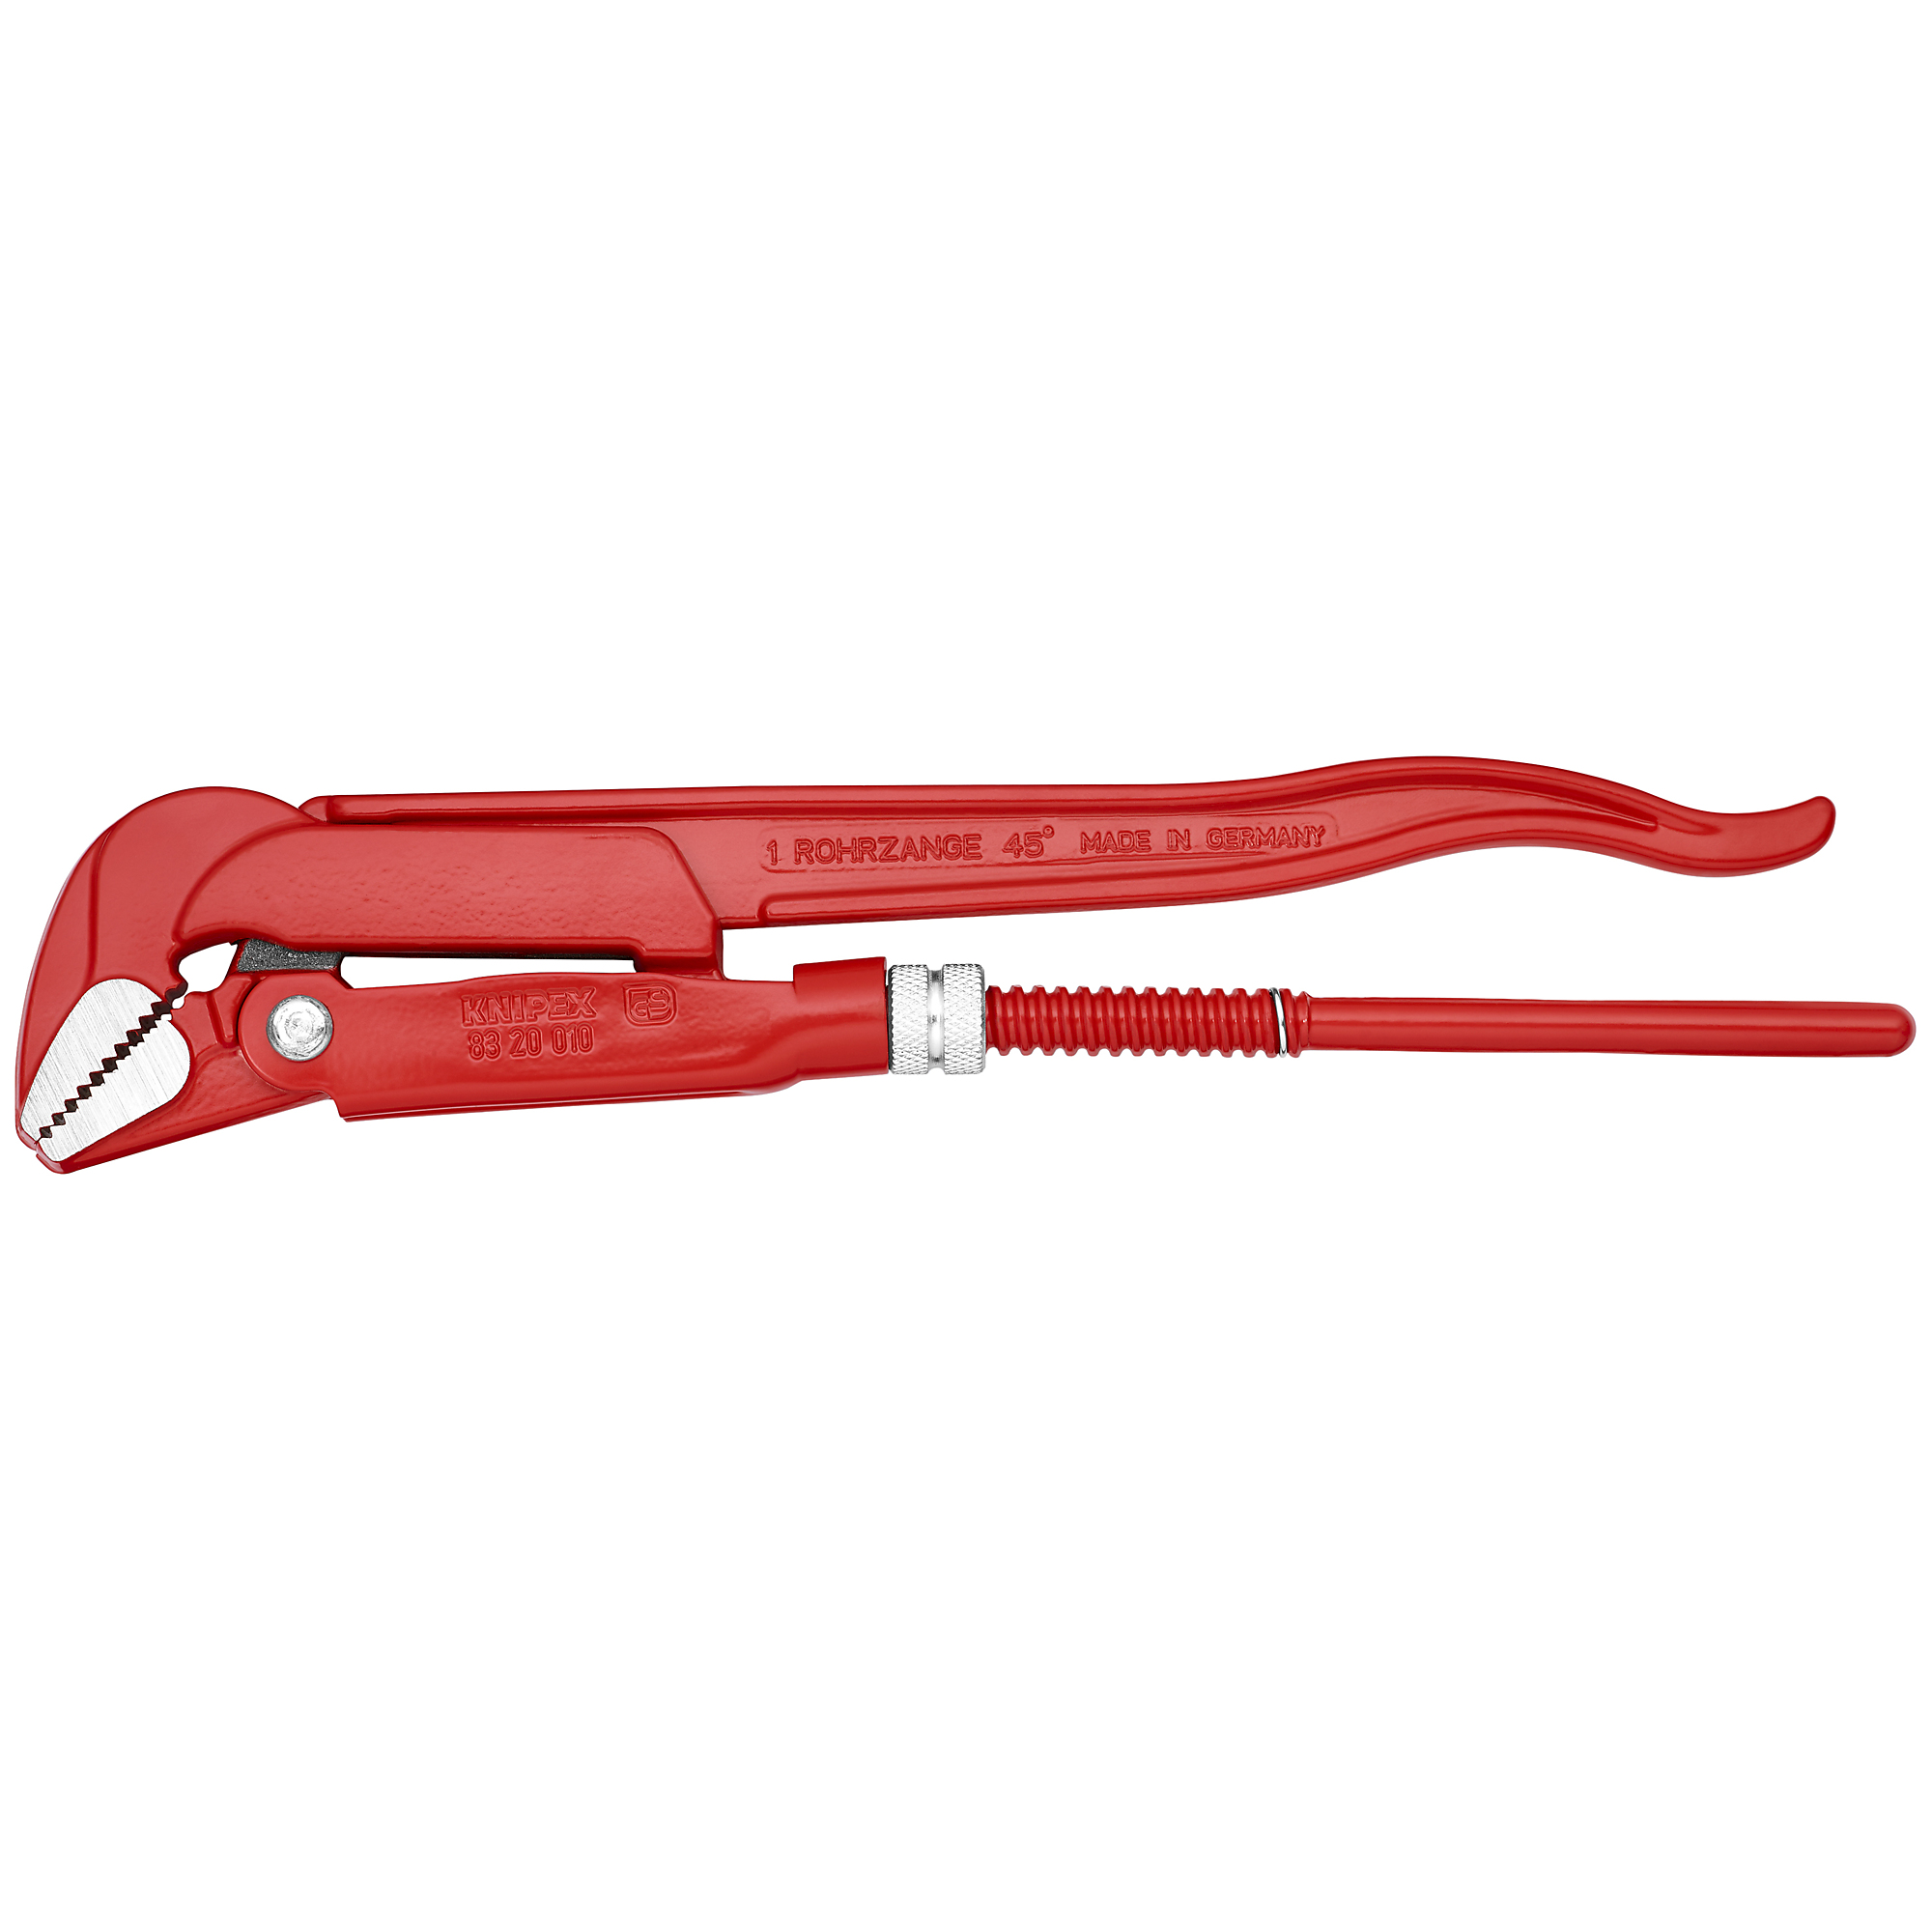 KNIPEX, Swedish Pipe Wrench-45Â°, 12.25Inch, Pieces (qty.) 1 Material Steel, Jaw Capacity 1.66 in, Model 83 20 010